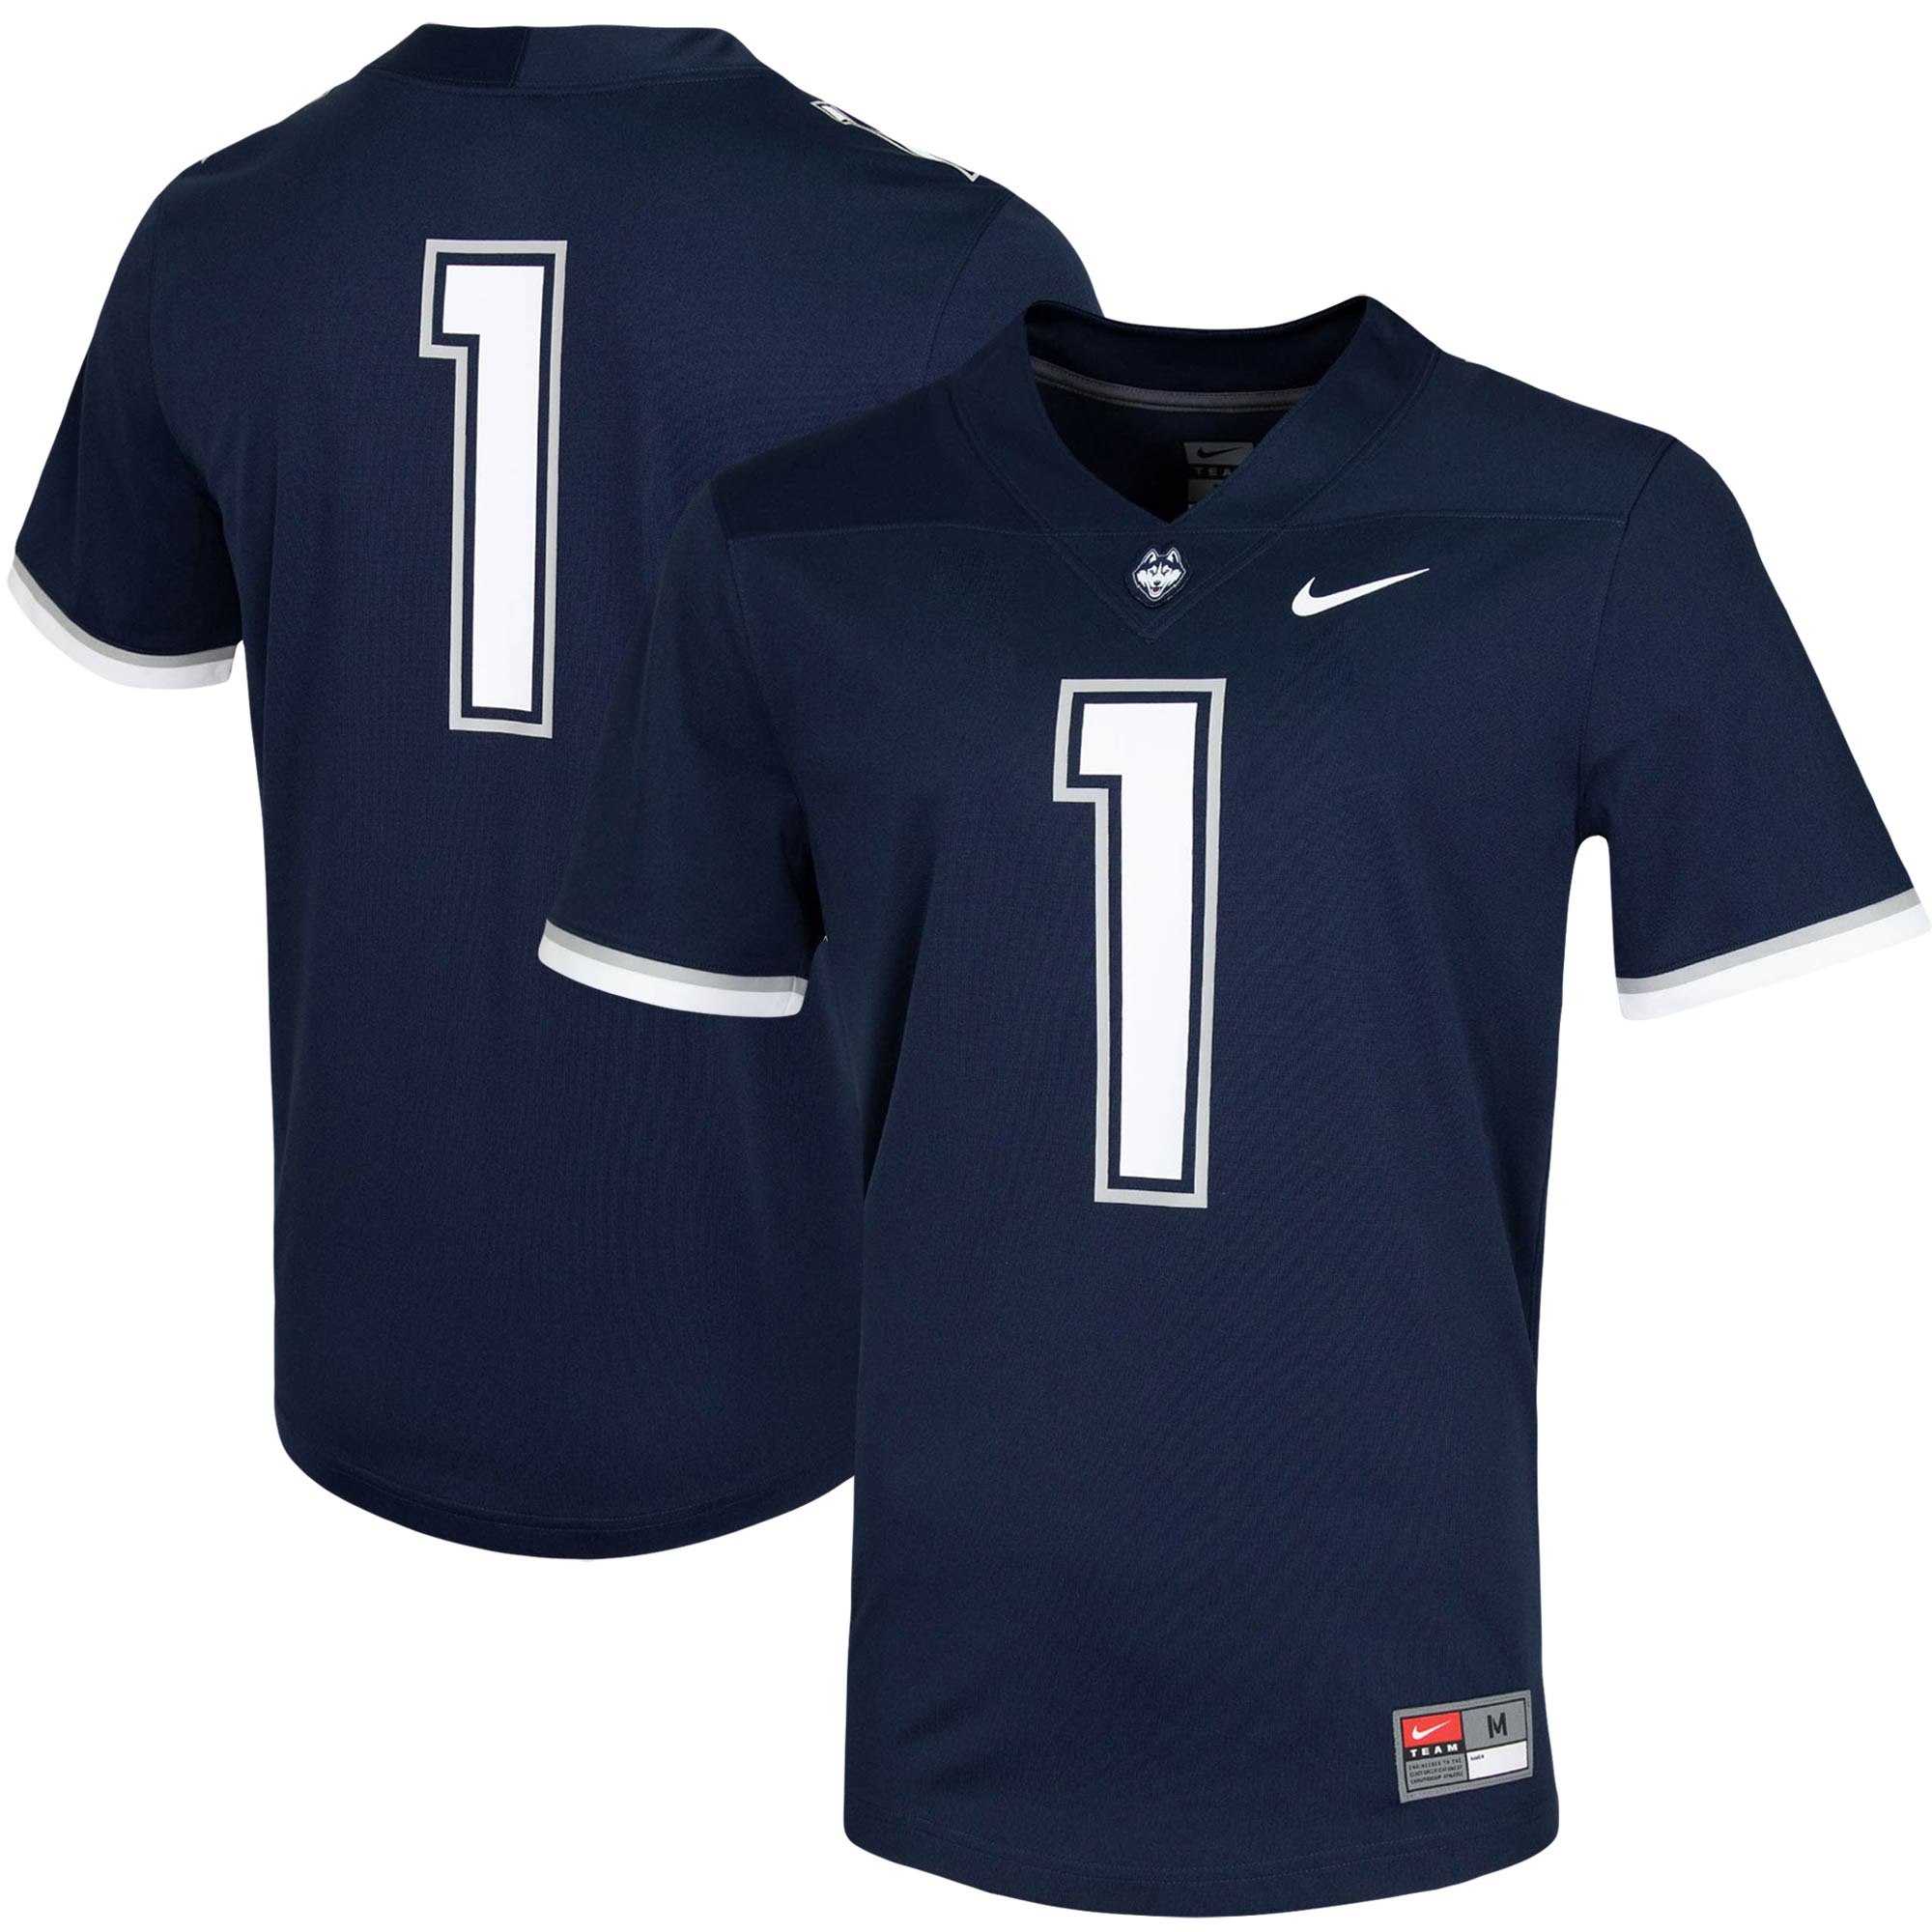 #1 Uconn Huskies Untouchable Game Jersey - Navy For Youth Women Men